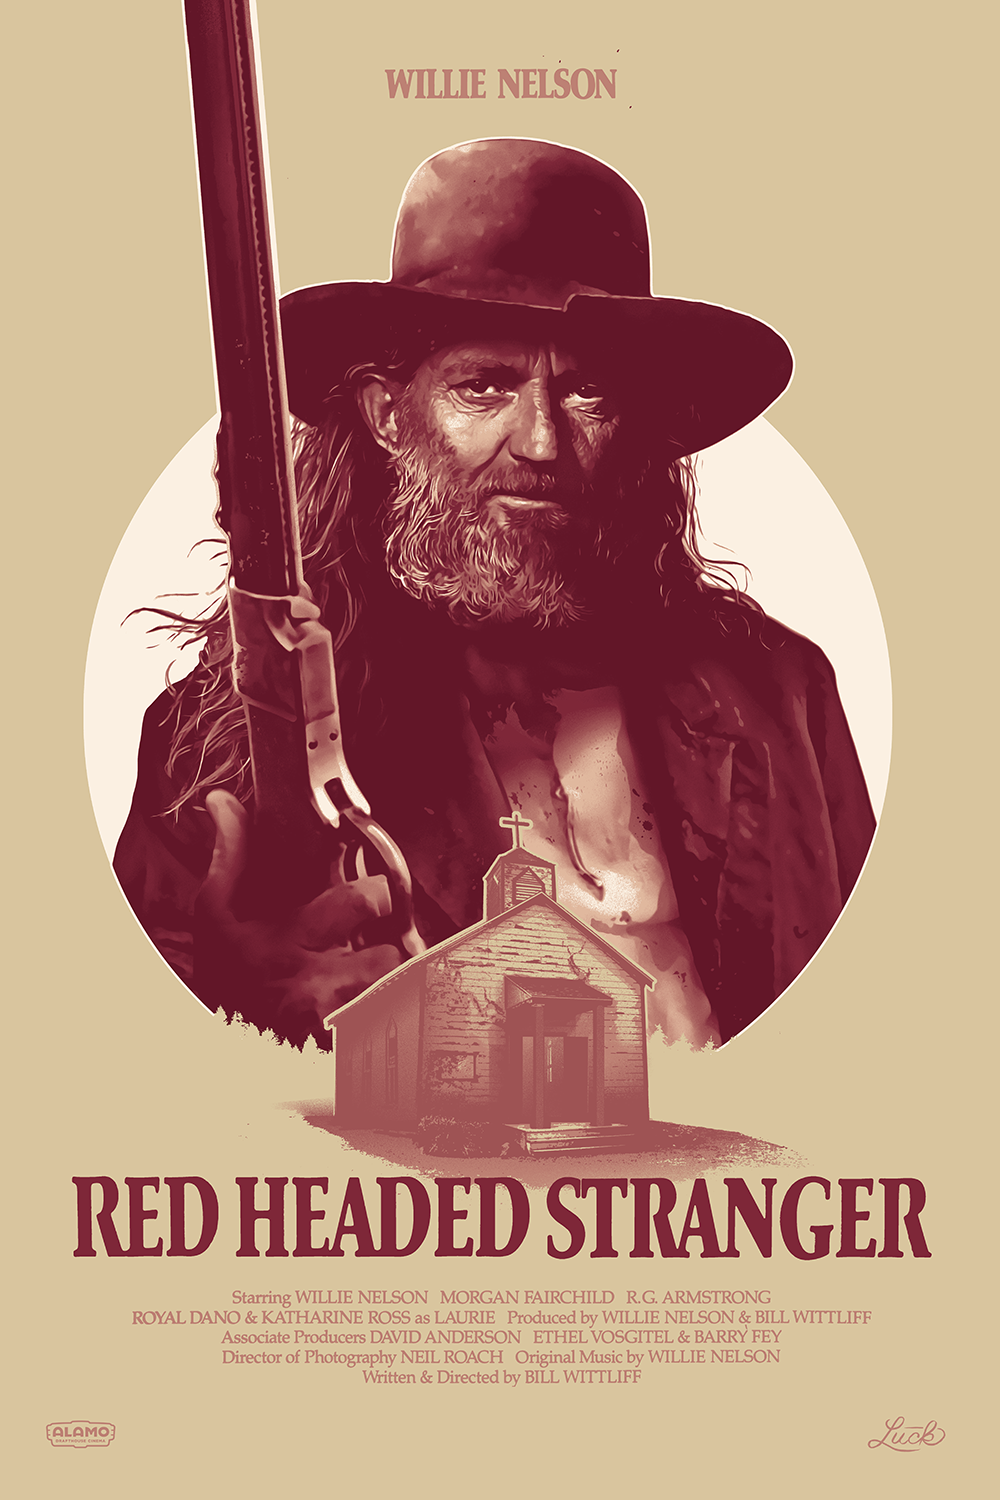 Red headed stranger movie torrents the hand that feeds you torrent